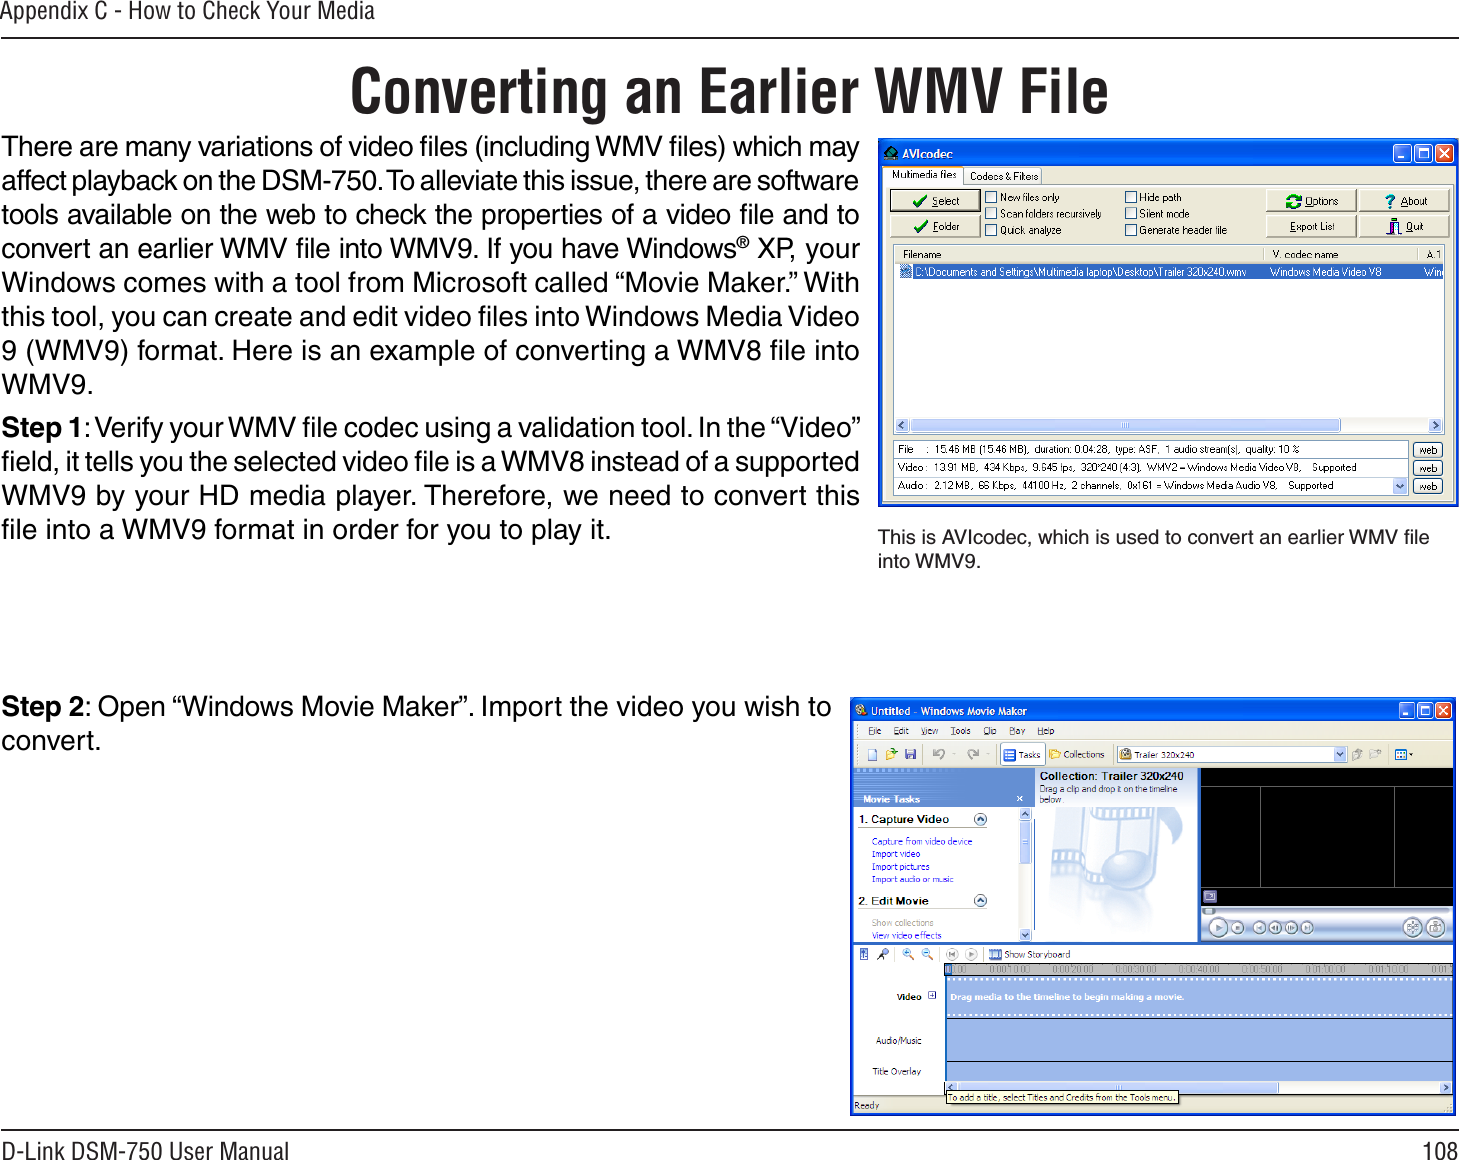 108D-Link DSM-750 User ManualAppendix C - How to Check Your MediaConverting an Earlier WMV FileThere are many variations of video ﬁles (including WMV ﬁles) which may affect playback on the DSM-750. To alleviate this issue, there are software tools available on the web to check the properties of a video ﬁle and to convert an earlier WMV ﬁle into WMV9. If you have Windows® XP, your Windows comes with a tool from Microsoft called “Movie Maker.” With this tool, you can create and edit video ﬁles into Windows Media Video 9 (WMV9) format. Here is an example of converting a WMV8 ﬁle into WMV9.Step 1: Verify your WMV ﬁle codec using a validation tool. In the “Video” ﬁeld, it tells you the selected video ﬁle is a WMV8 instead of a supported WMV9 by your HD media player. Therefore, we need to convert this ﬁle into a WMV9 format in order for you to play it.Step 2: Open “Windows Movie Maker”. Import the video you wish to convert.This is AVIcodec, which is used to convert an earlier WMV ﬁle into WMV9.